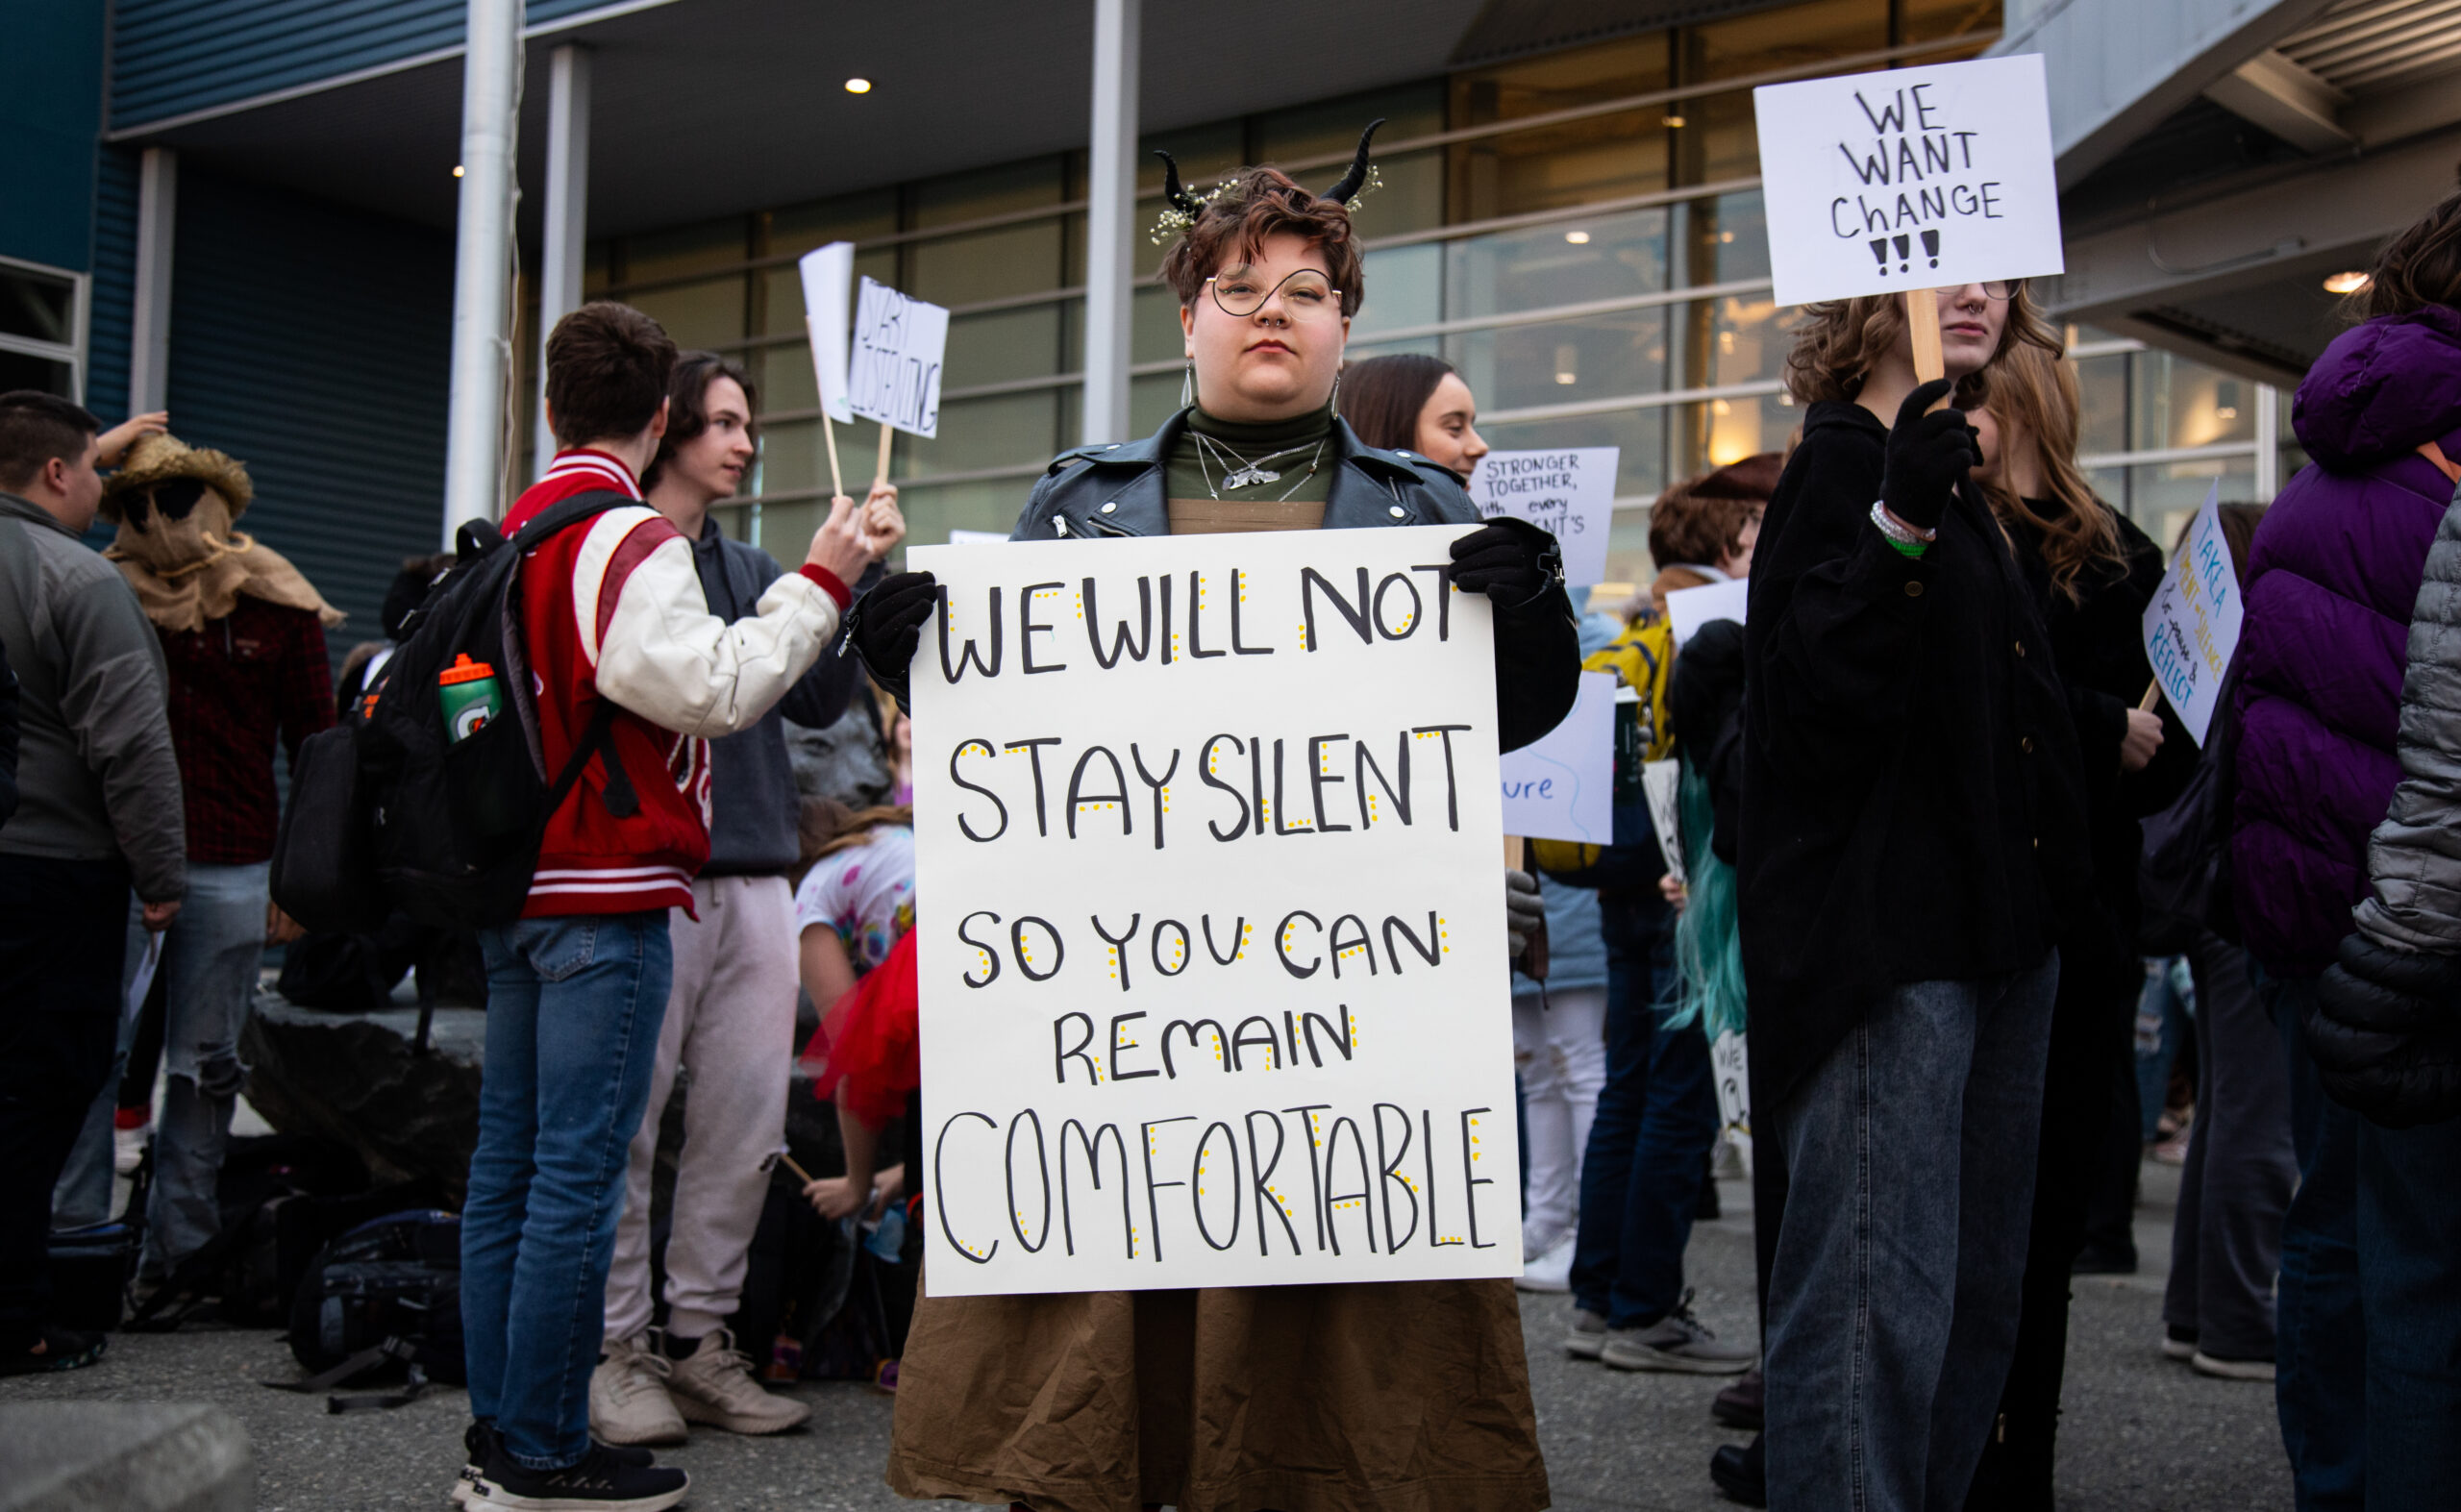 A person in costume stands at a protest with a handmade sign.